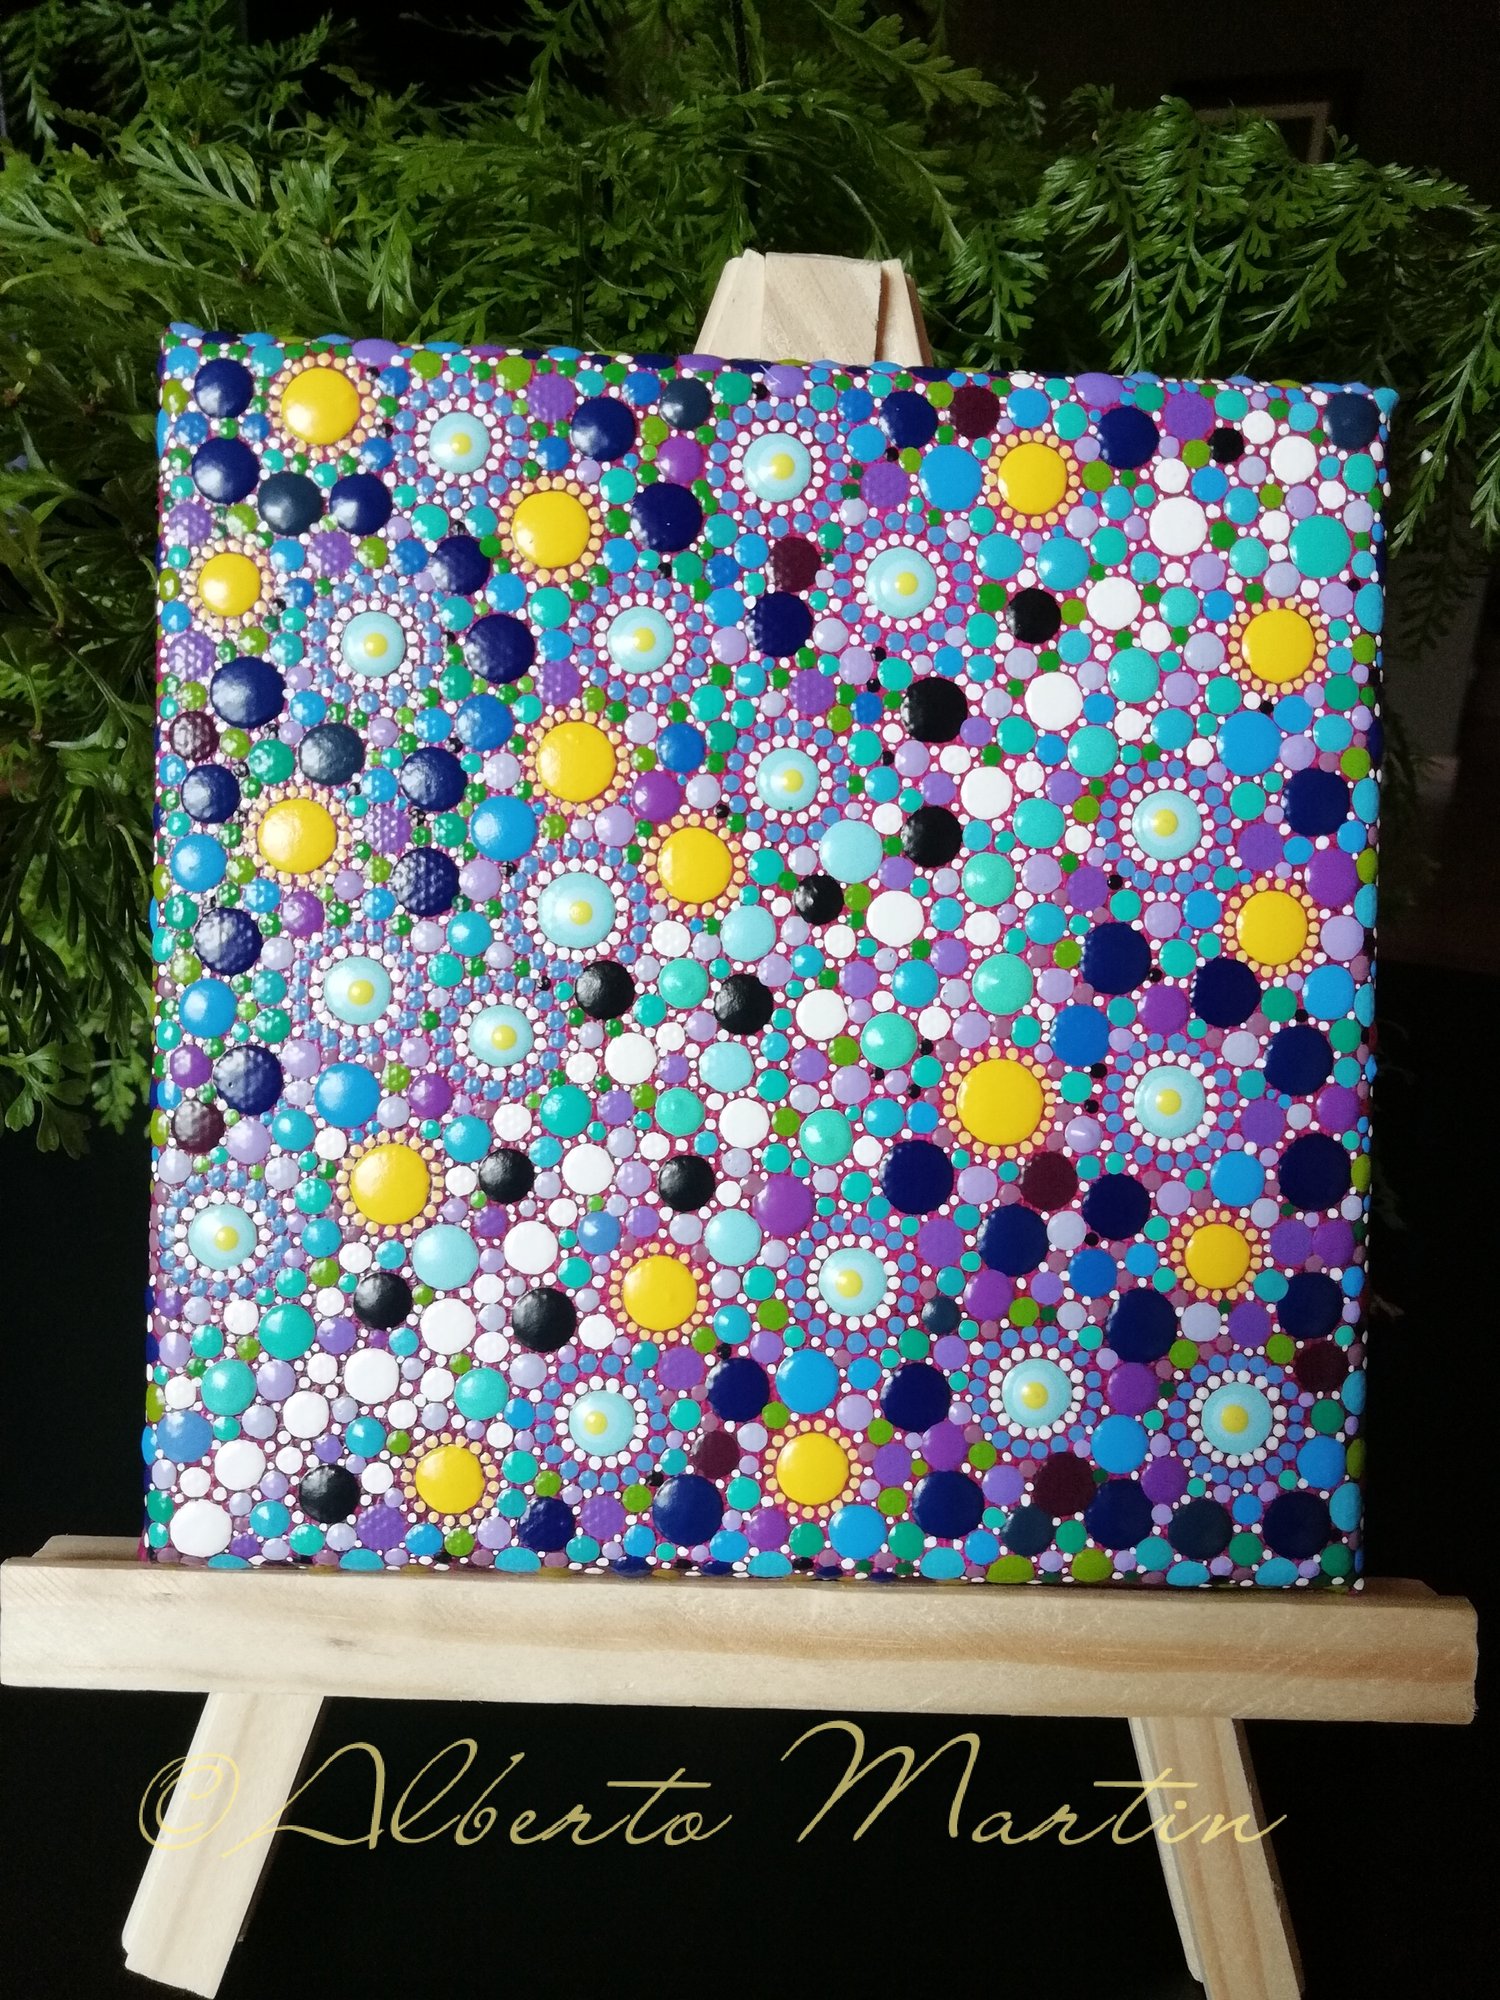 Image of Sun and Stars Dotart painted canvas by Alberto Martin